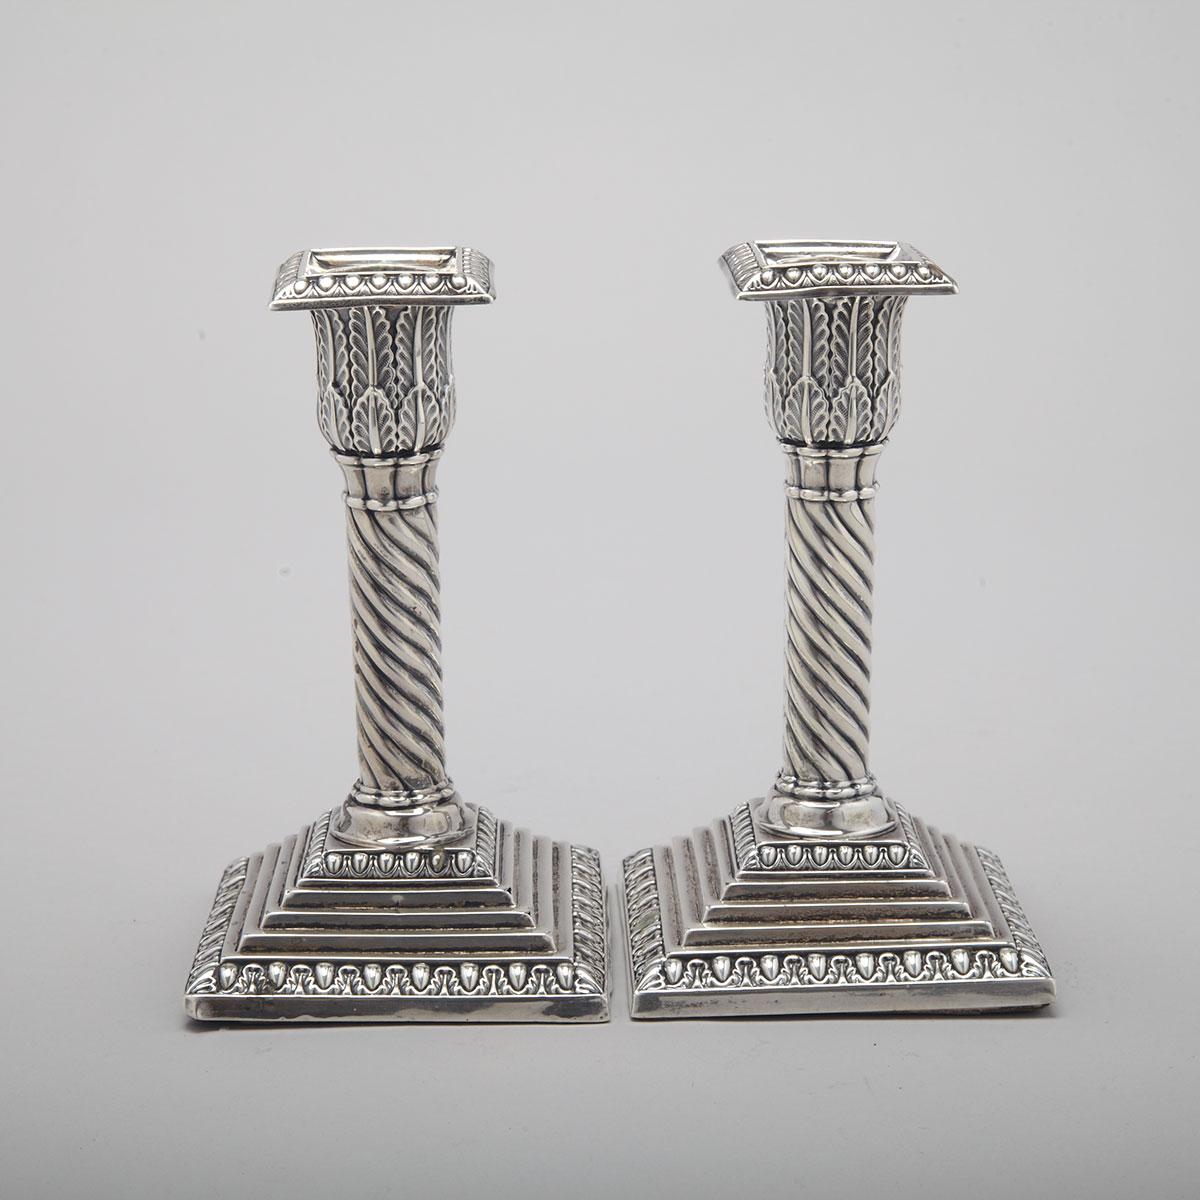 Pair of Victorian Silver Small Candlesticks, Henry Wilkinson & Co., Sheffield, 1882